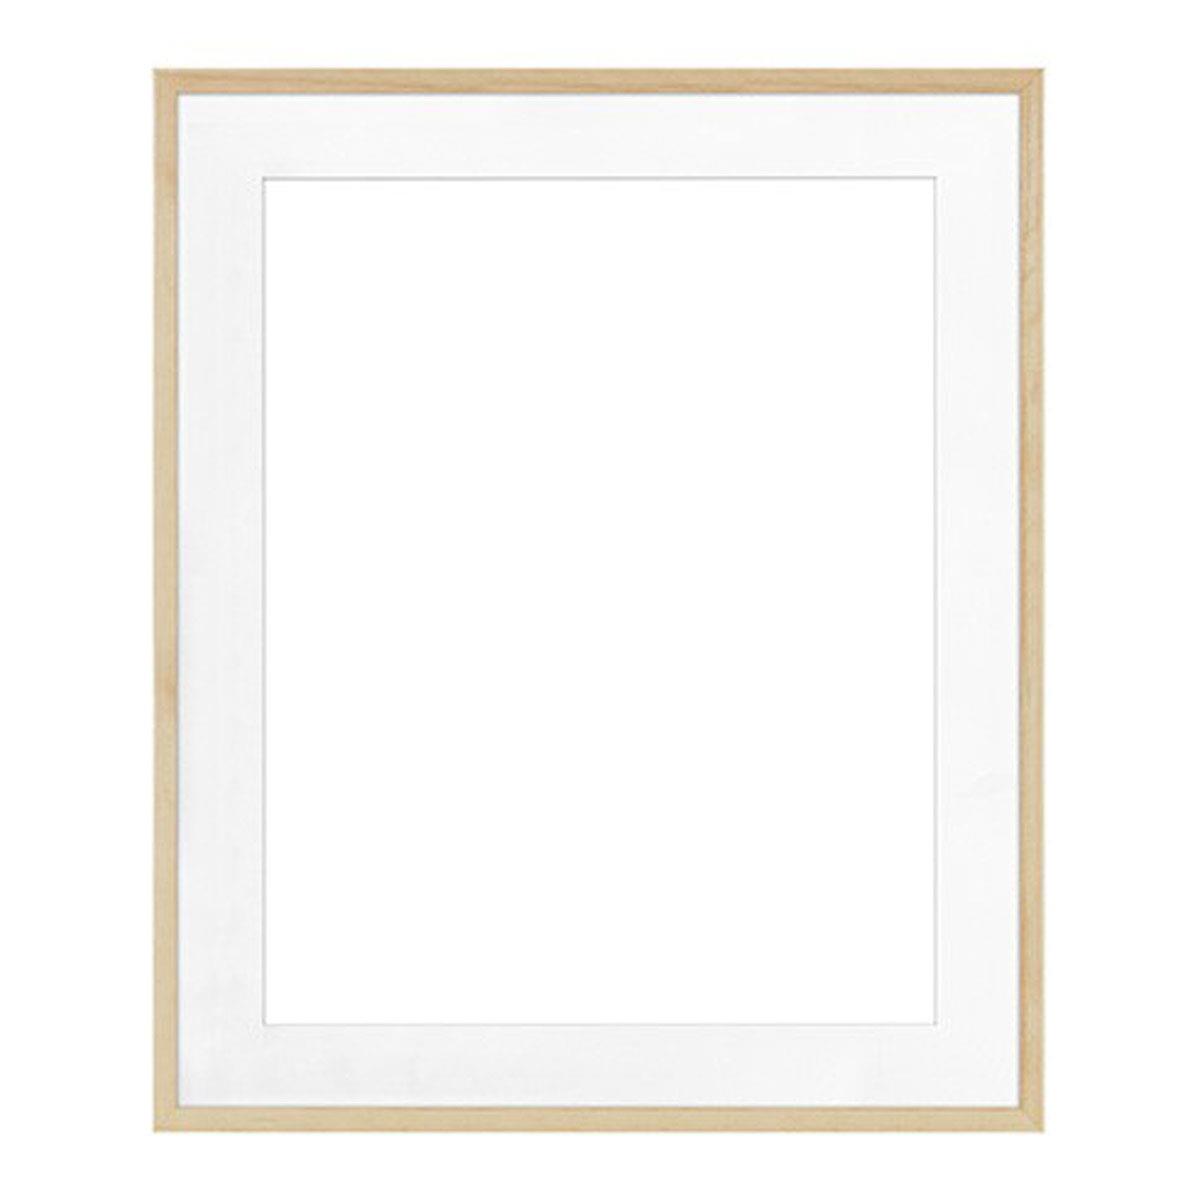 Image of Framatic Woodworks 11x14&quot; Natural Blonde Hardwood Frame for a 8x10&quot; Photograph